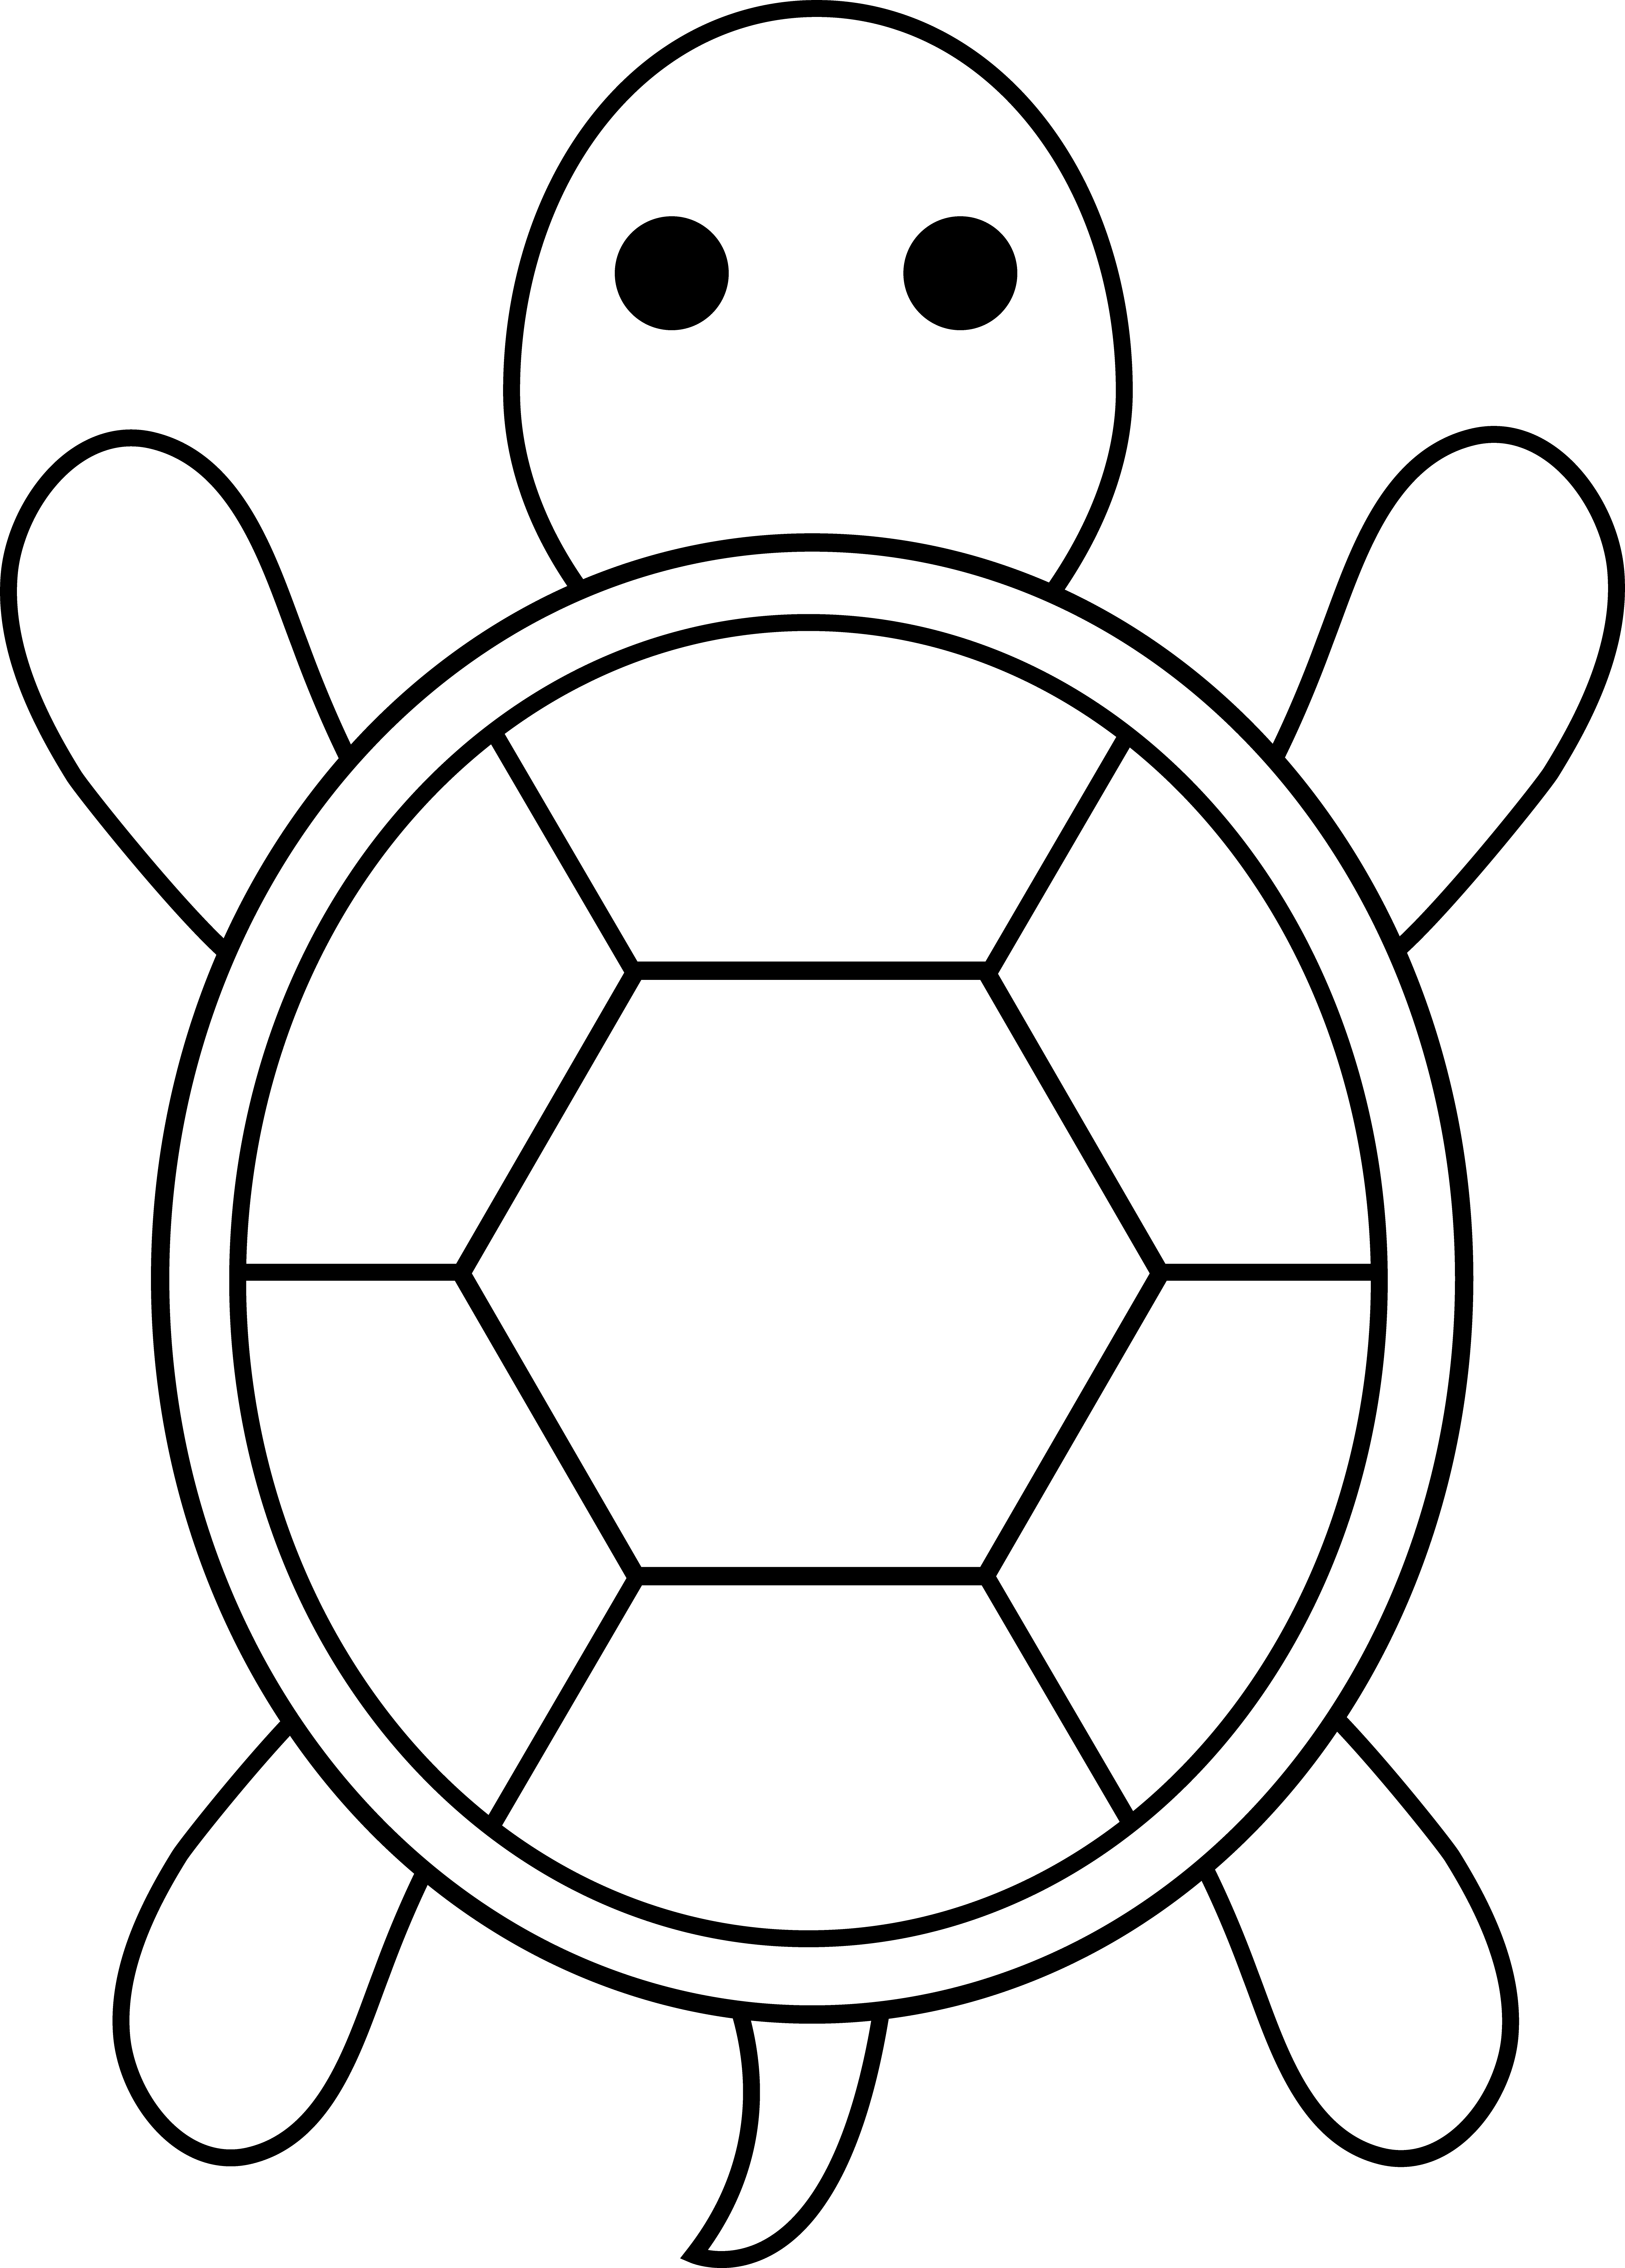 Turtle clipart outline